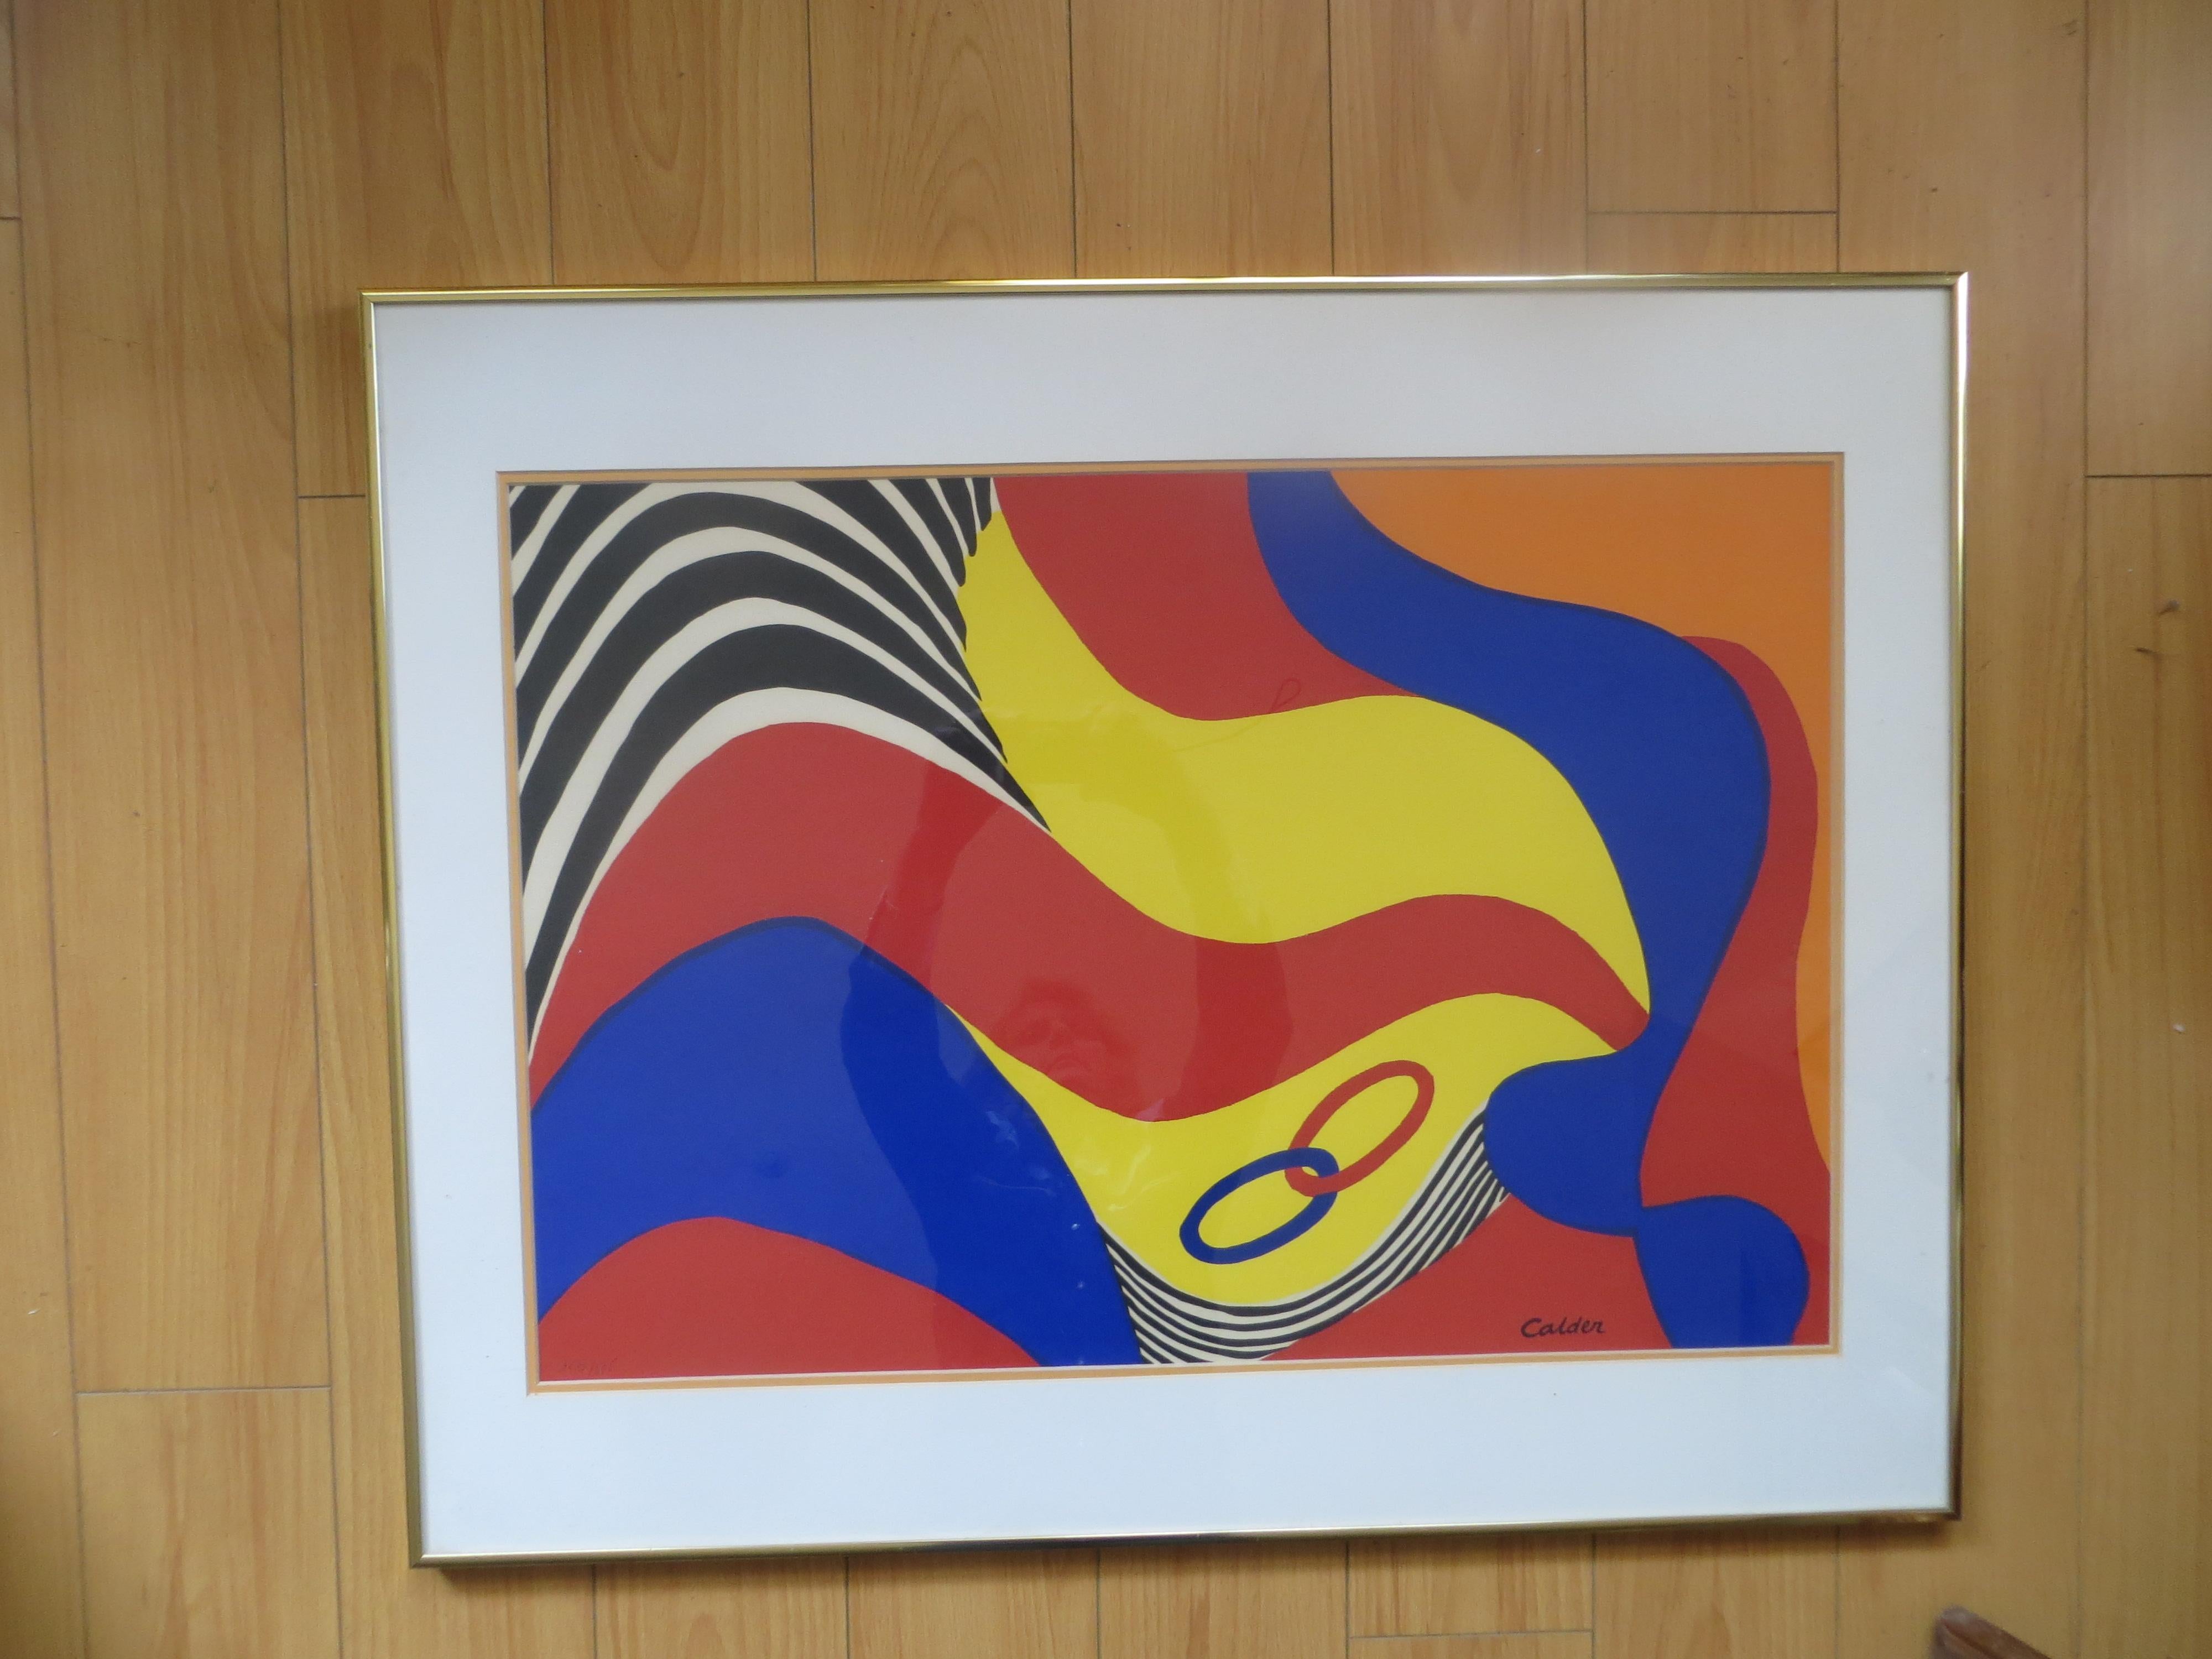  CalderAbstract lithograph Flying colors 1975 limitierte Auflage  im Angebot 5